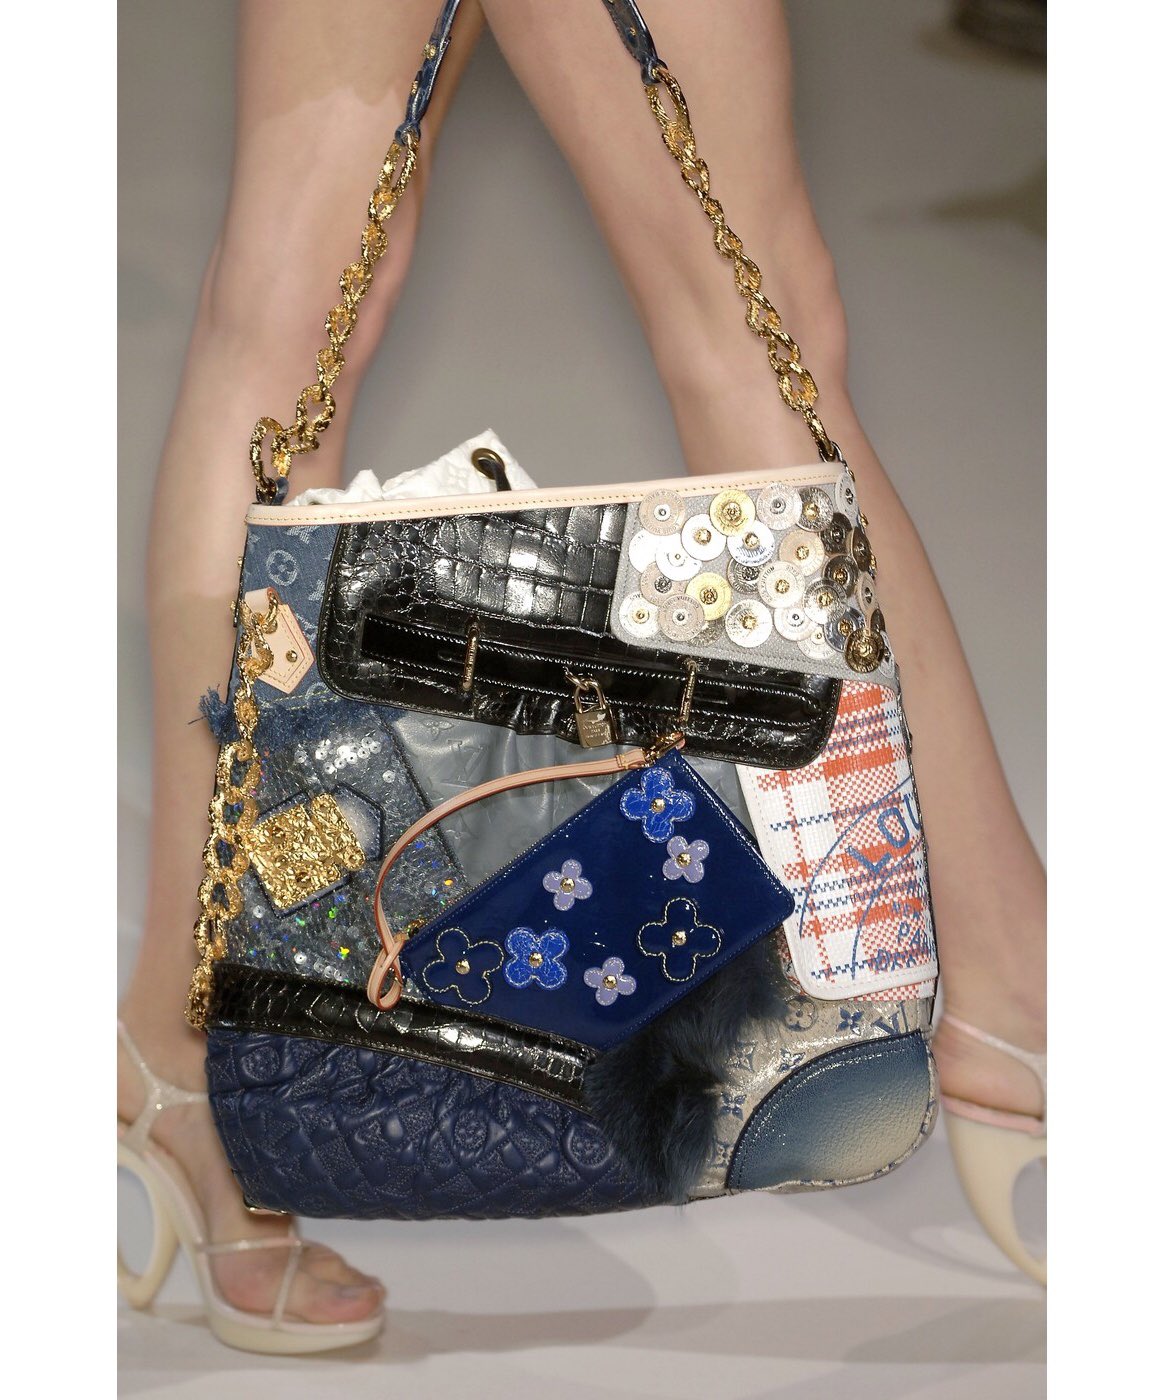 X 上的gastt Fashion：「Vintage Louis Vuitton Spring 2007 Limited Edition Patchwork  Handbag. Consists of 14 different Louis Vuitton bags sewn together.   / X